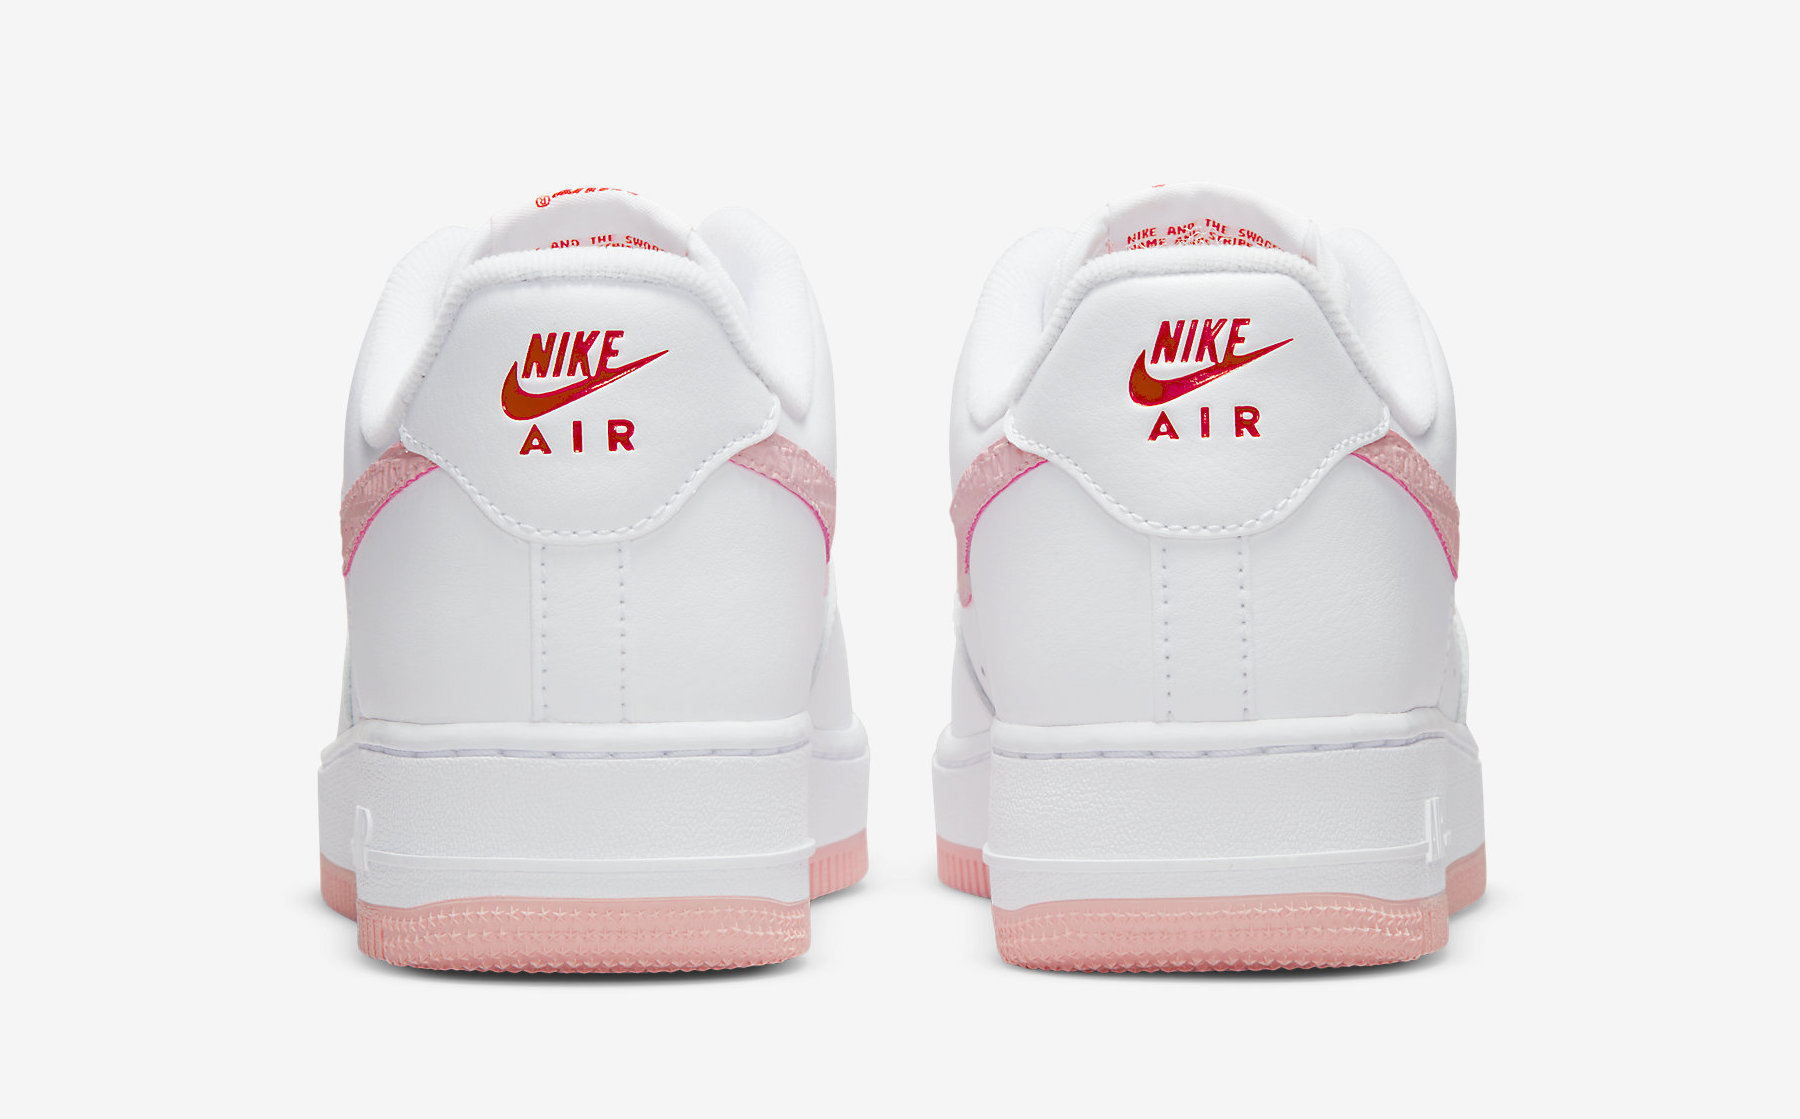 sweet Secondly tomorrow Nike Air Force 1 "Valentine's Day" 2022 DQ9320-100